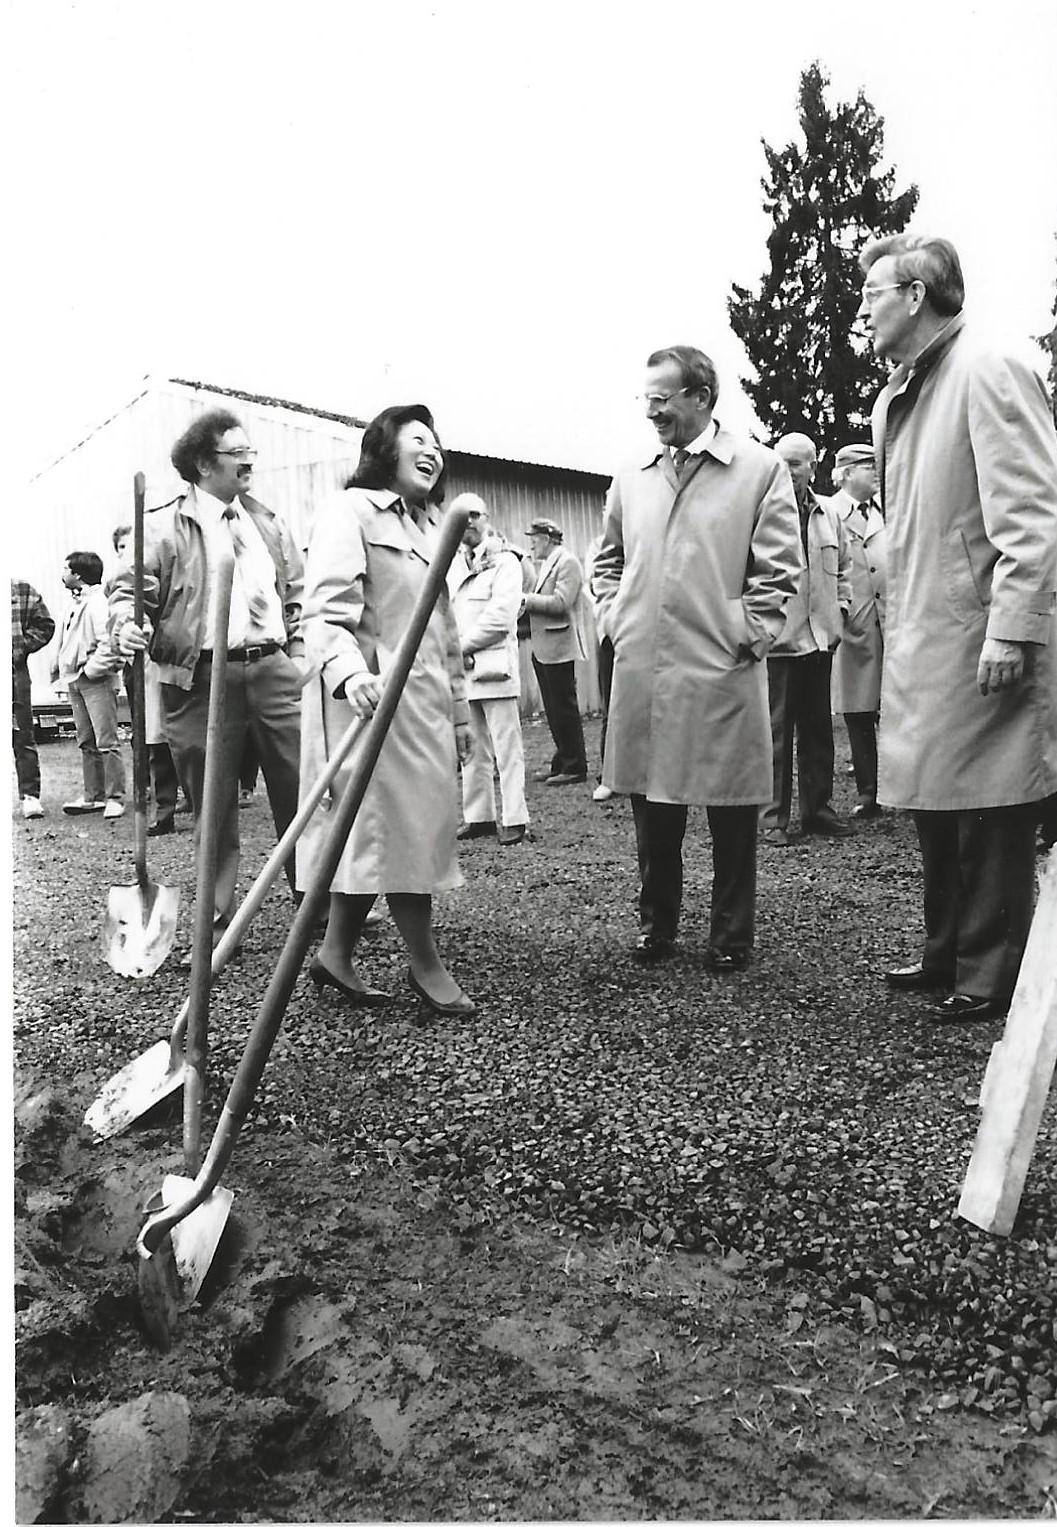 Four faculty members outside digging with shovels while smiling and laughing.